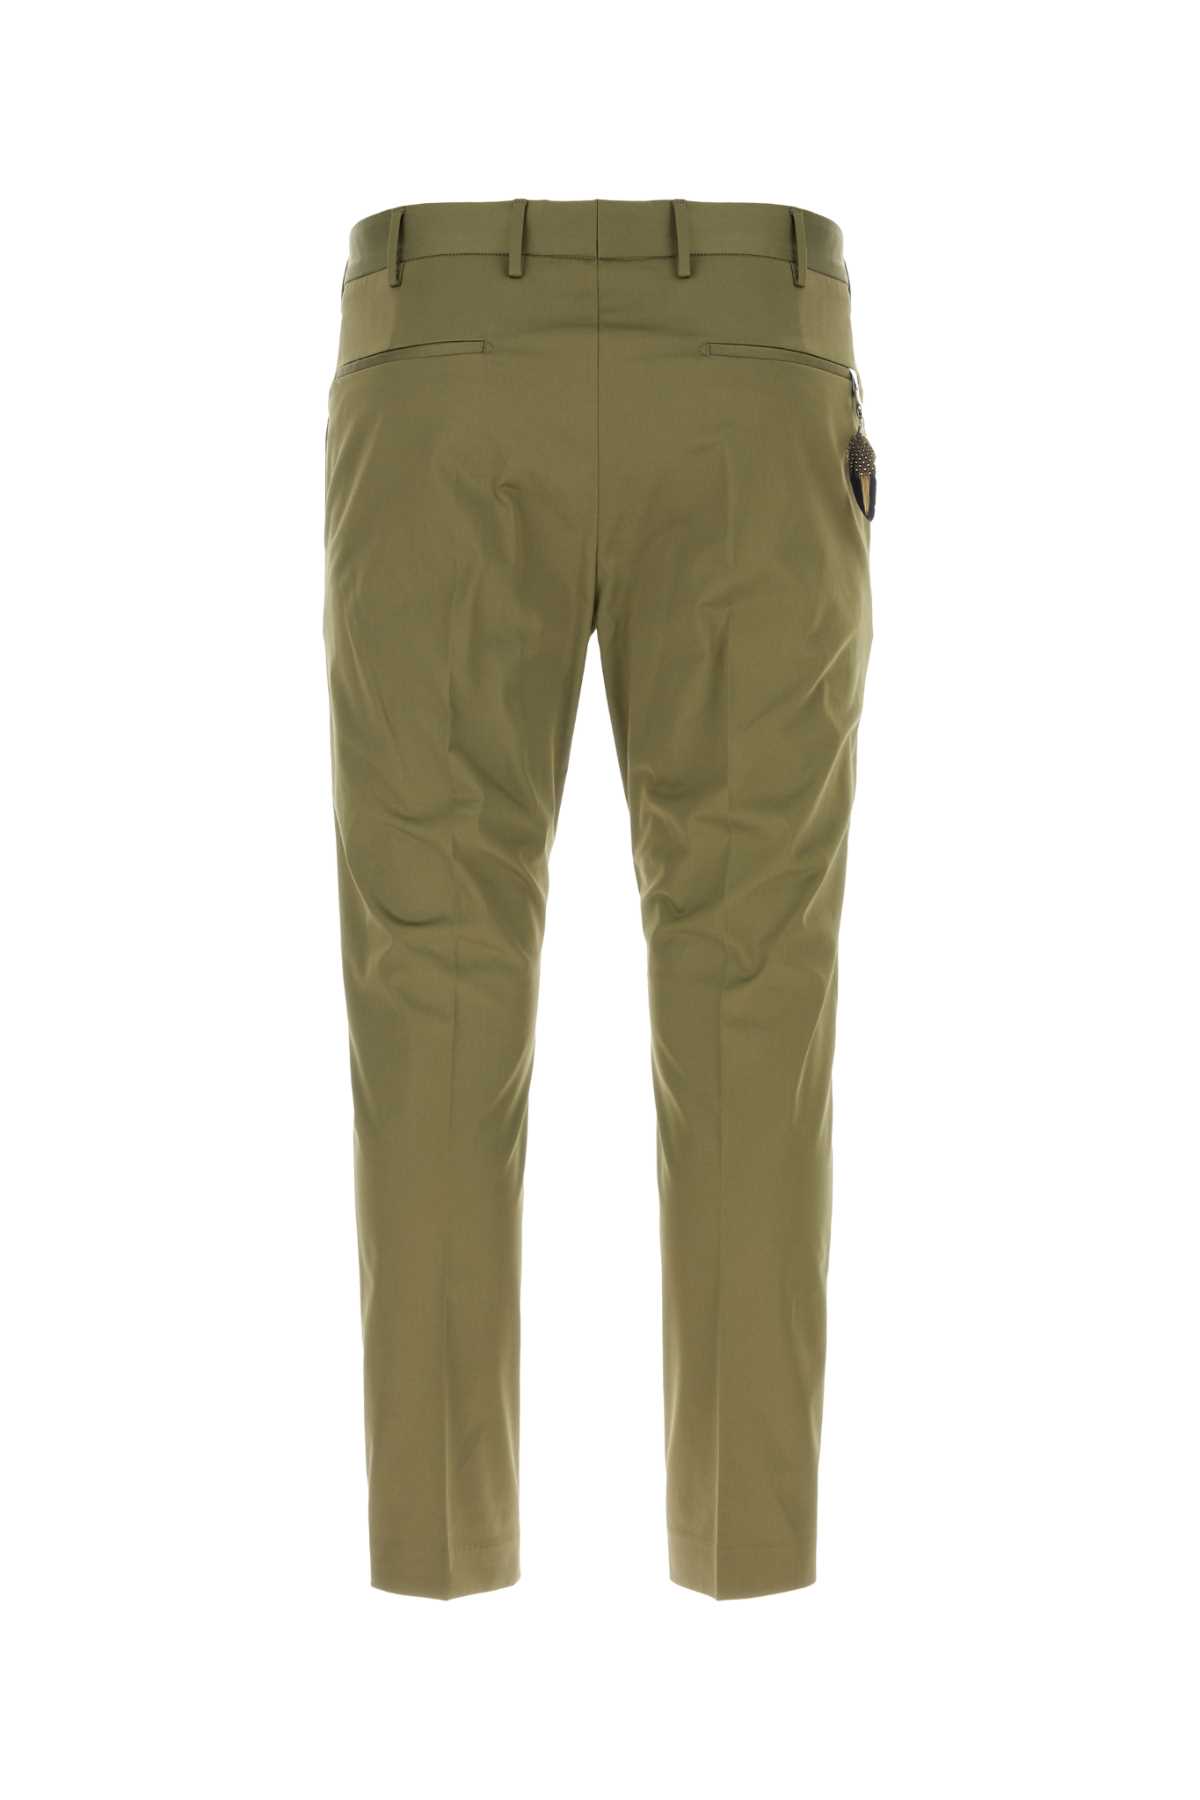 Pt01 Olive Green Stretch Cotton Pant In Verdemilitare